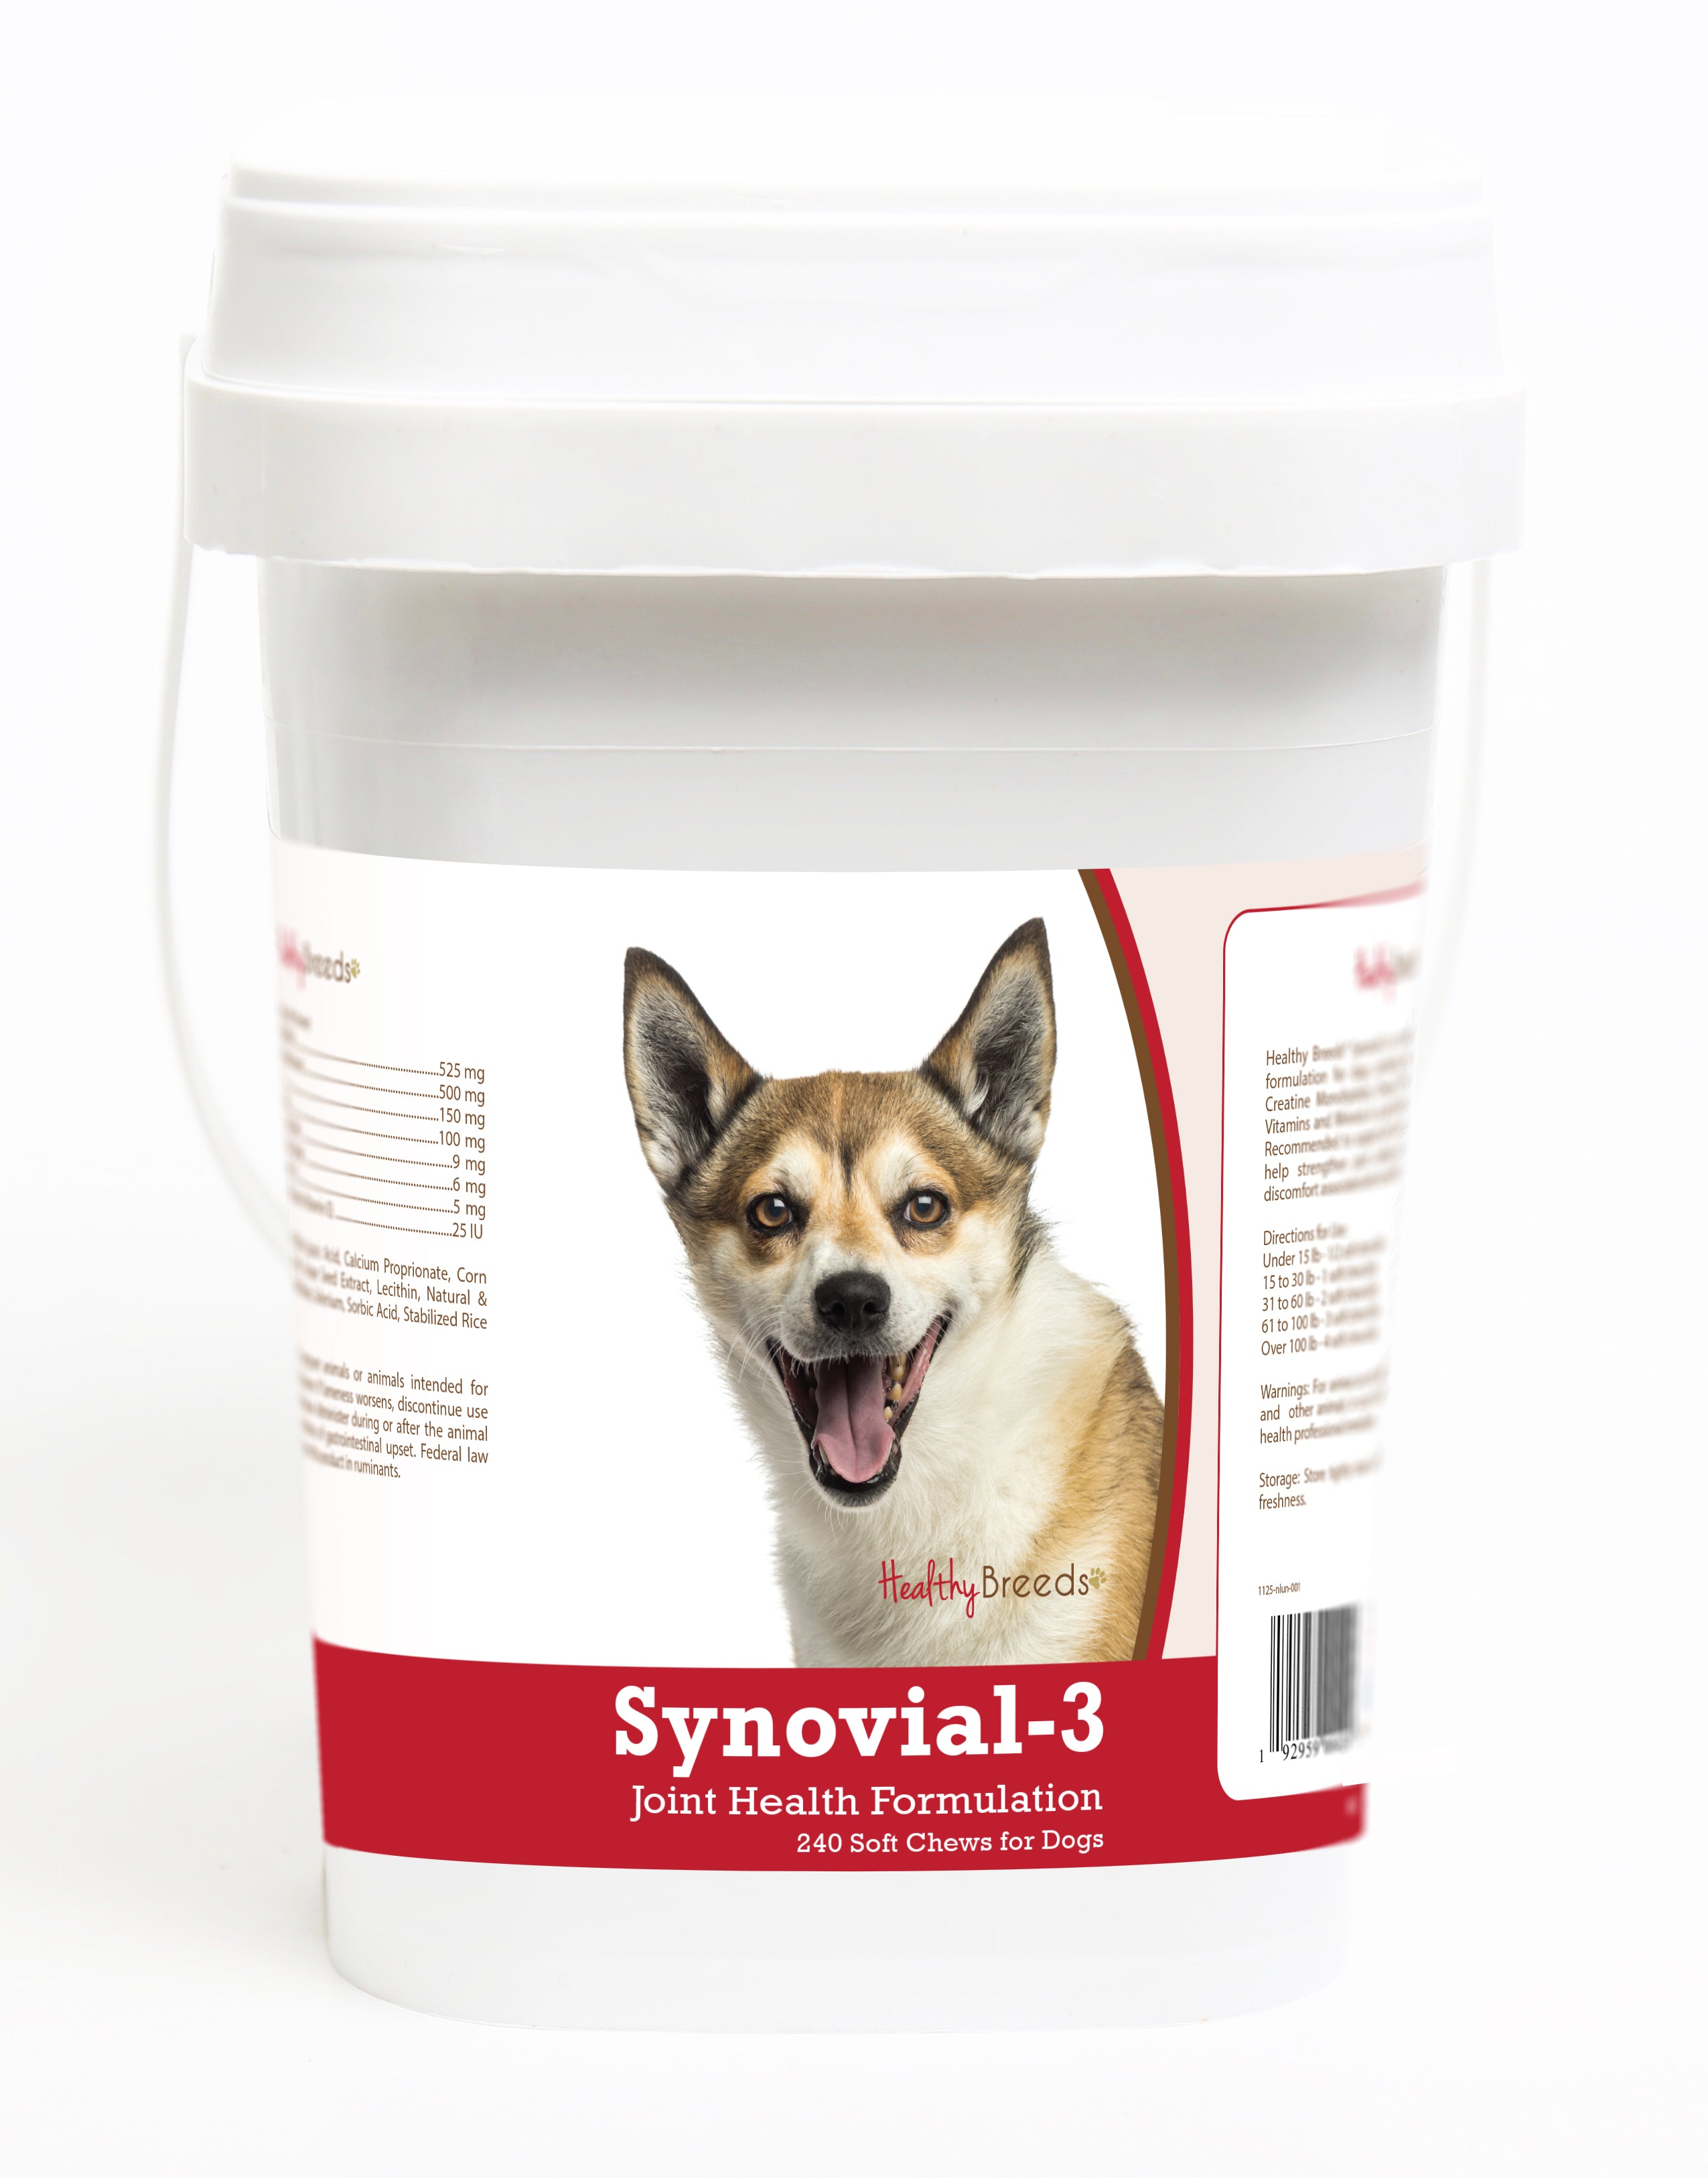 Norwegian Lundehund Synovial-3 Joint Health Formulation Soft Chews 240 Count